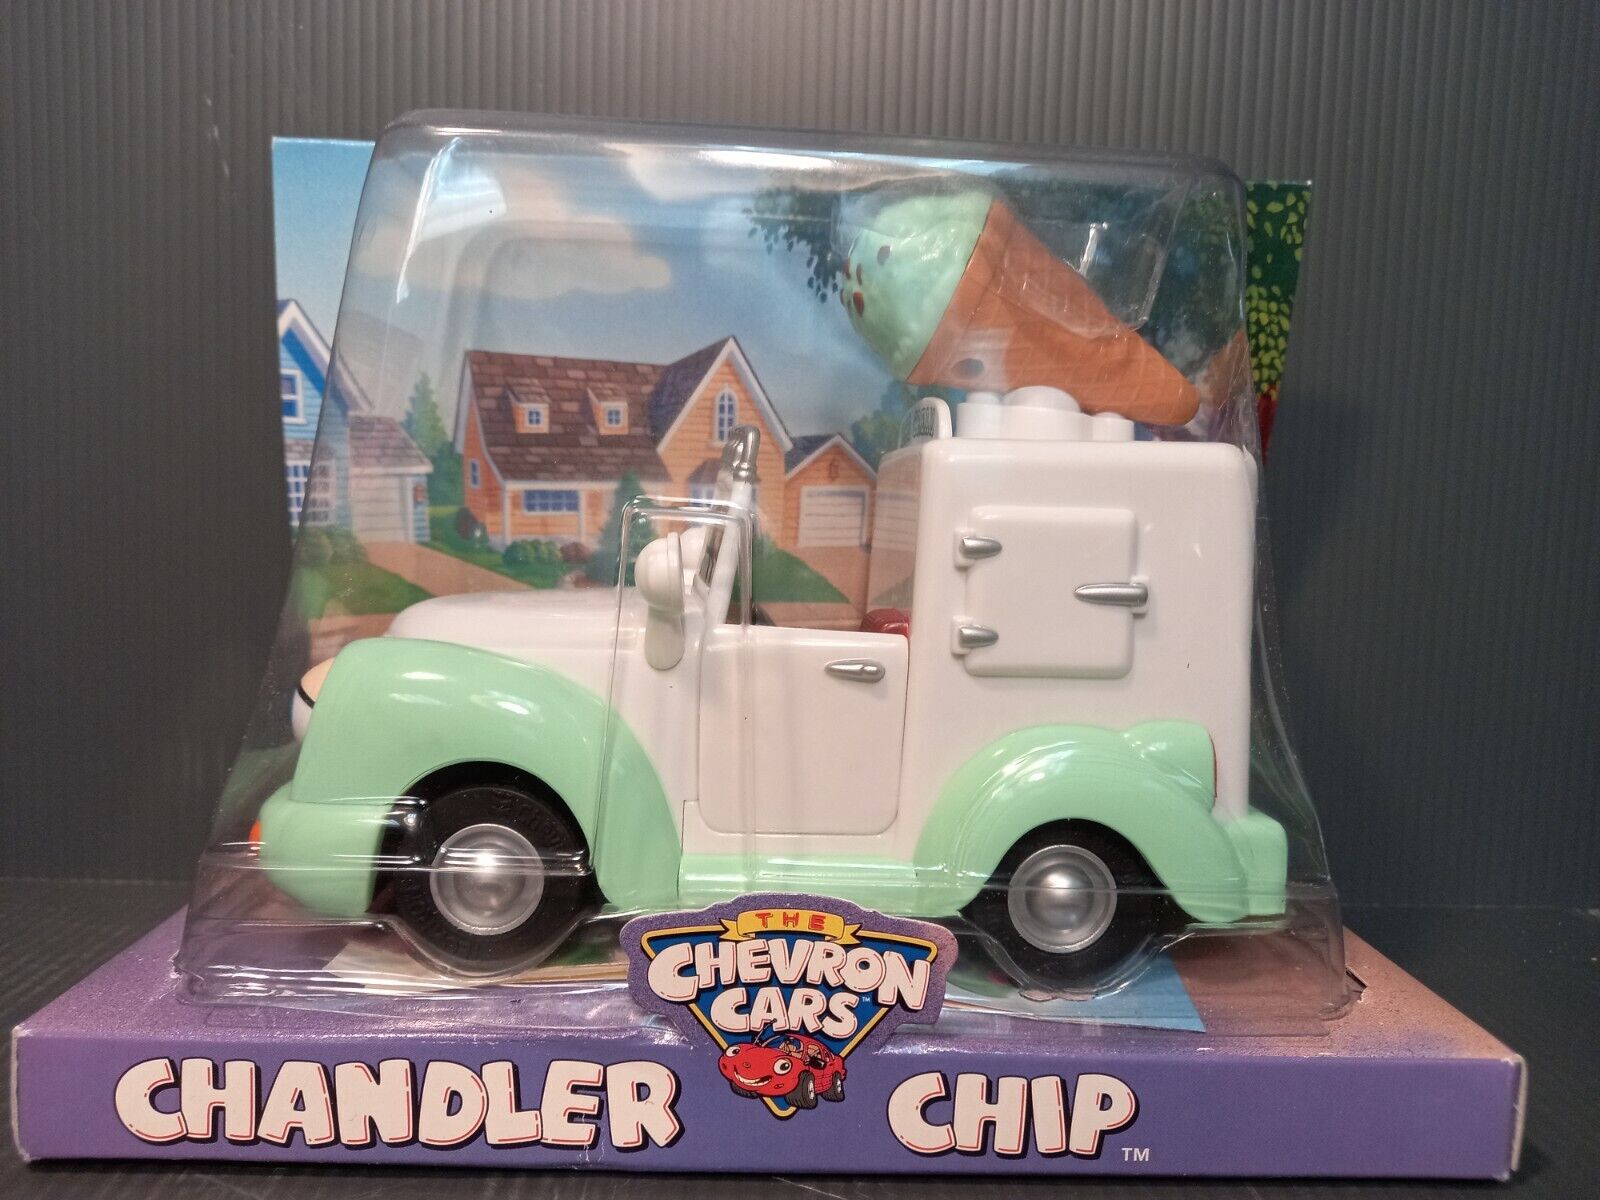 The Chevron Cars- Vintage - Chandler Chip - Collectible 2003